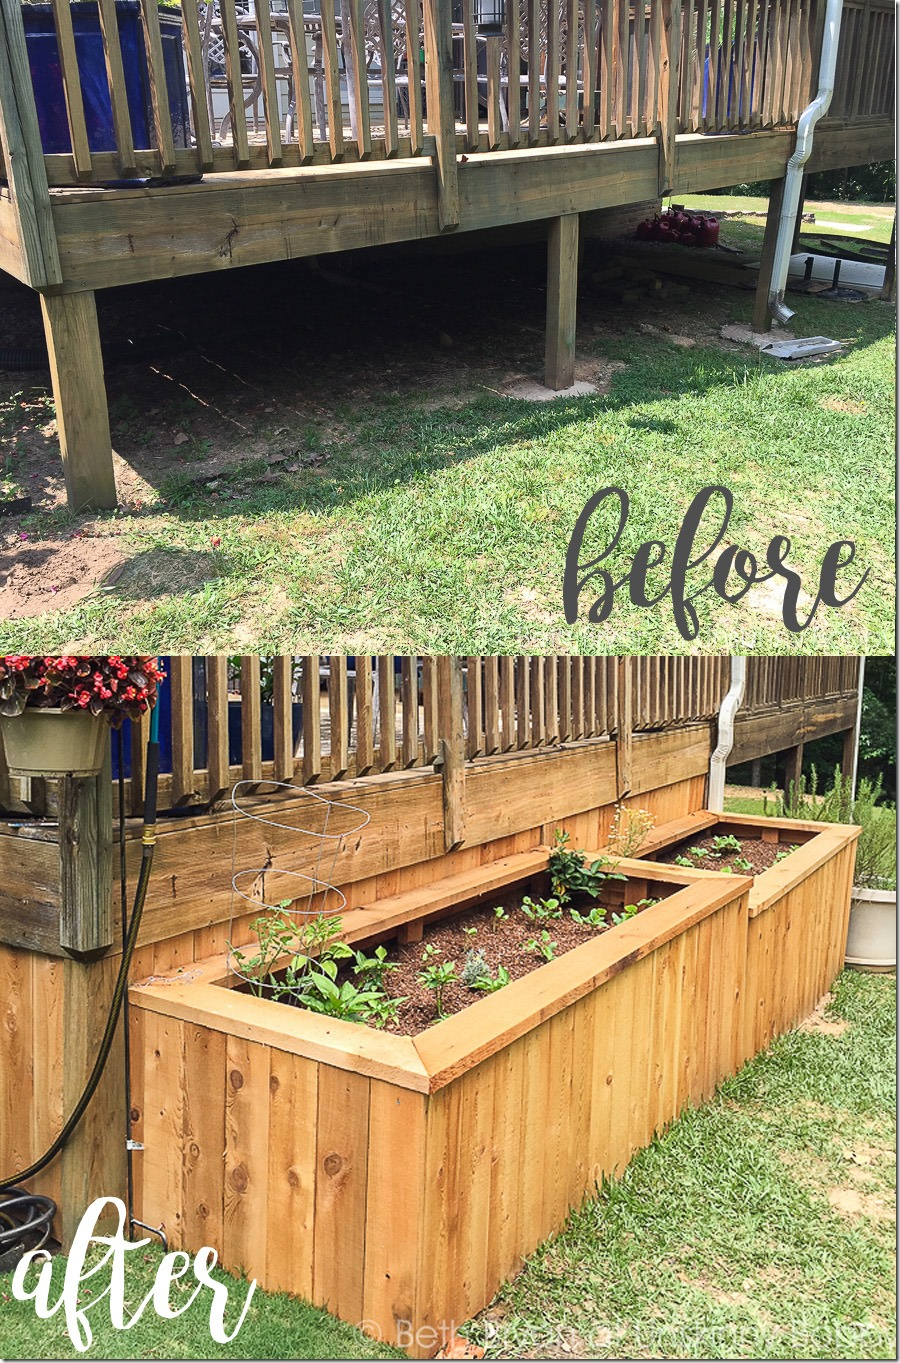 A Backyard Makeover With Raised Garden Beds Unskinny Boppy intended for sizing 900 X 1363